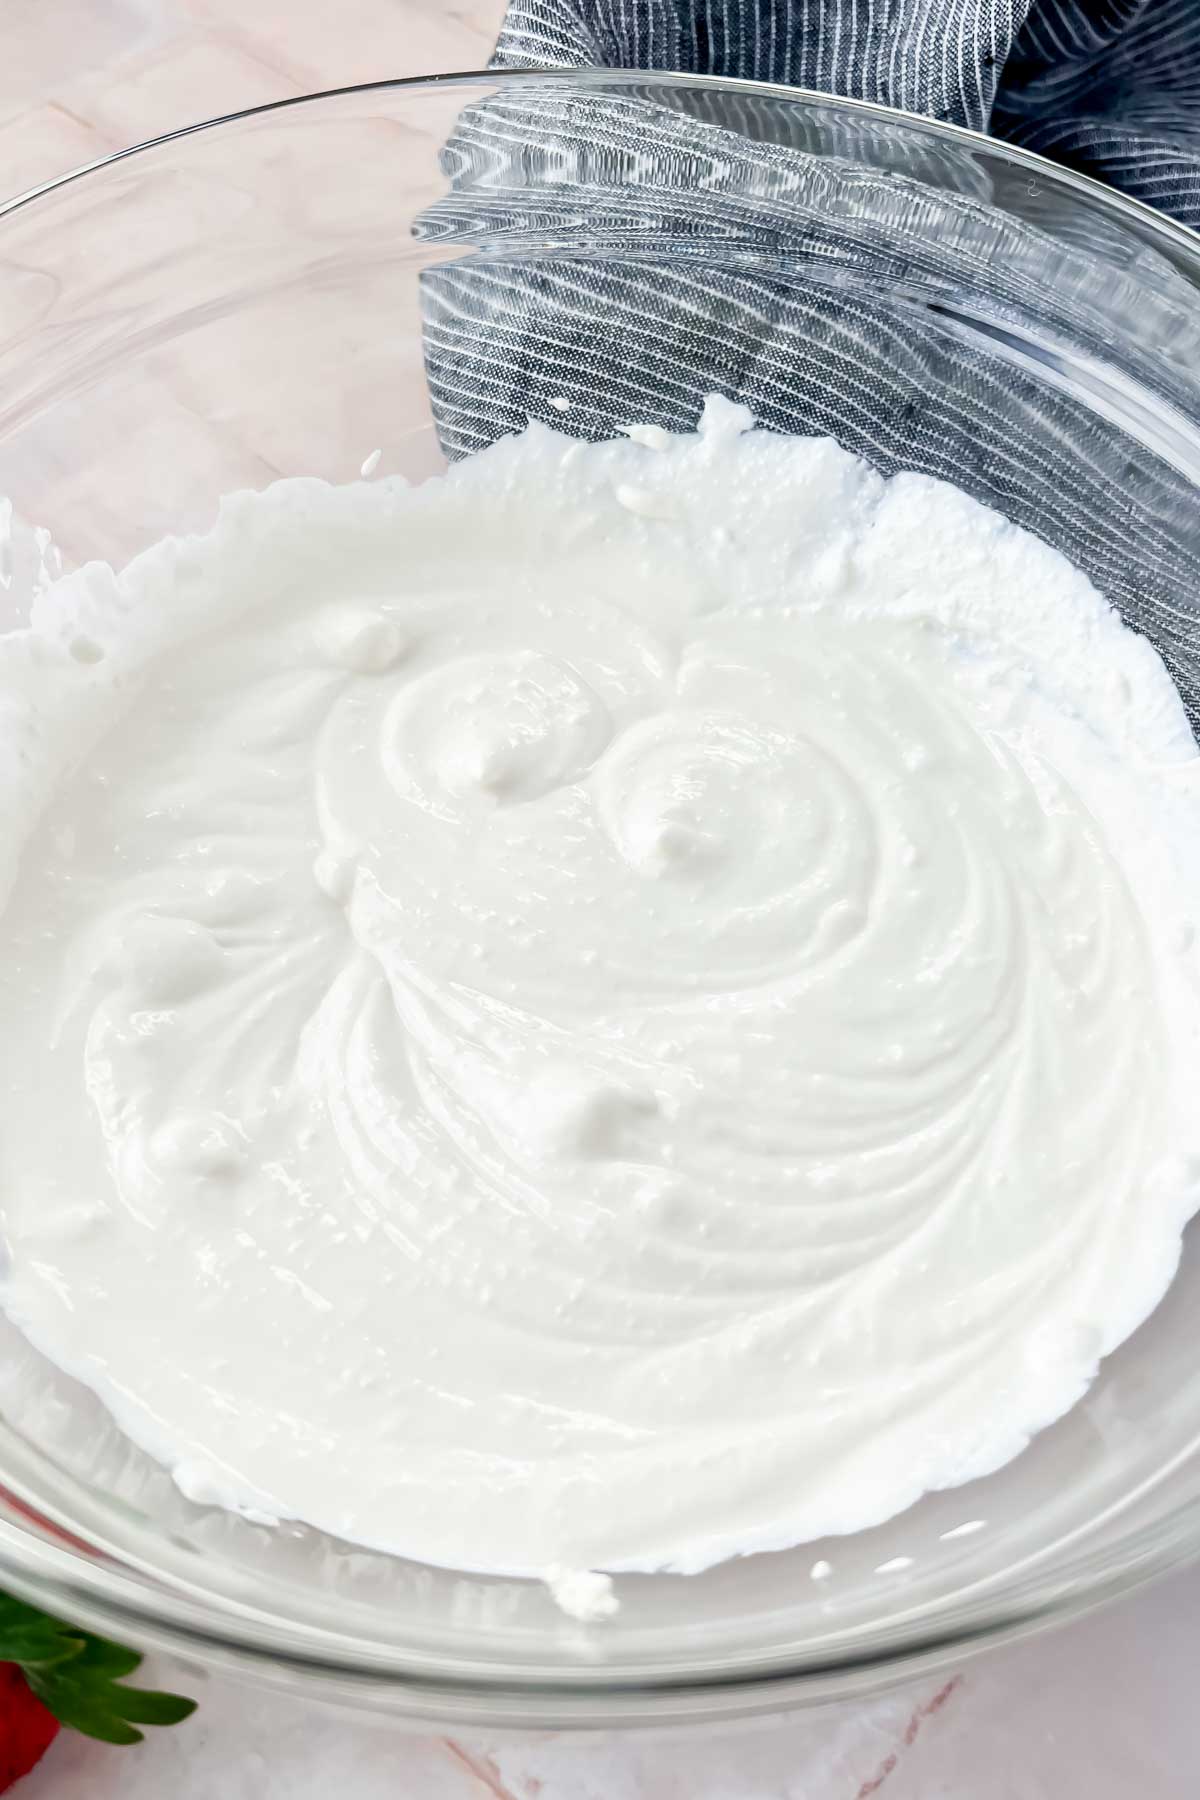 whipped cottage cheese in glass mixing bowl.